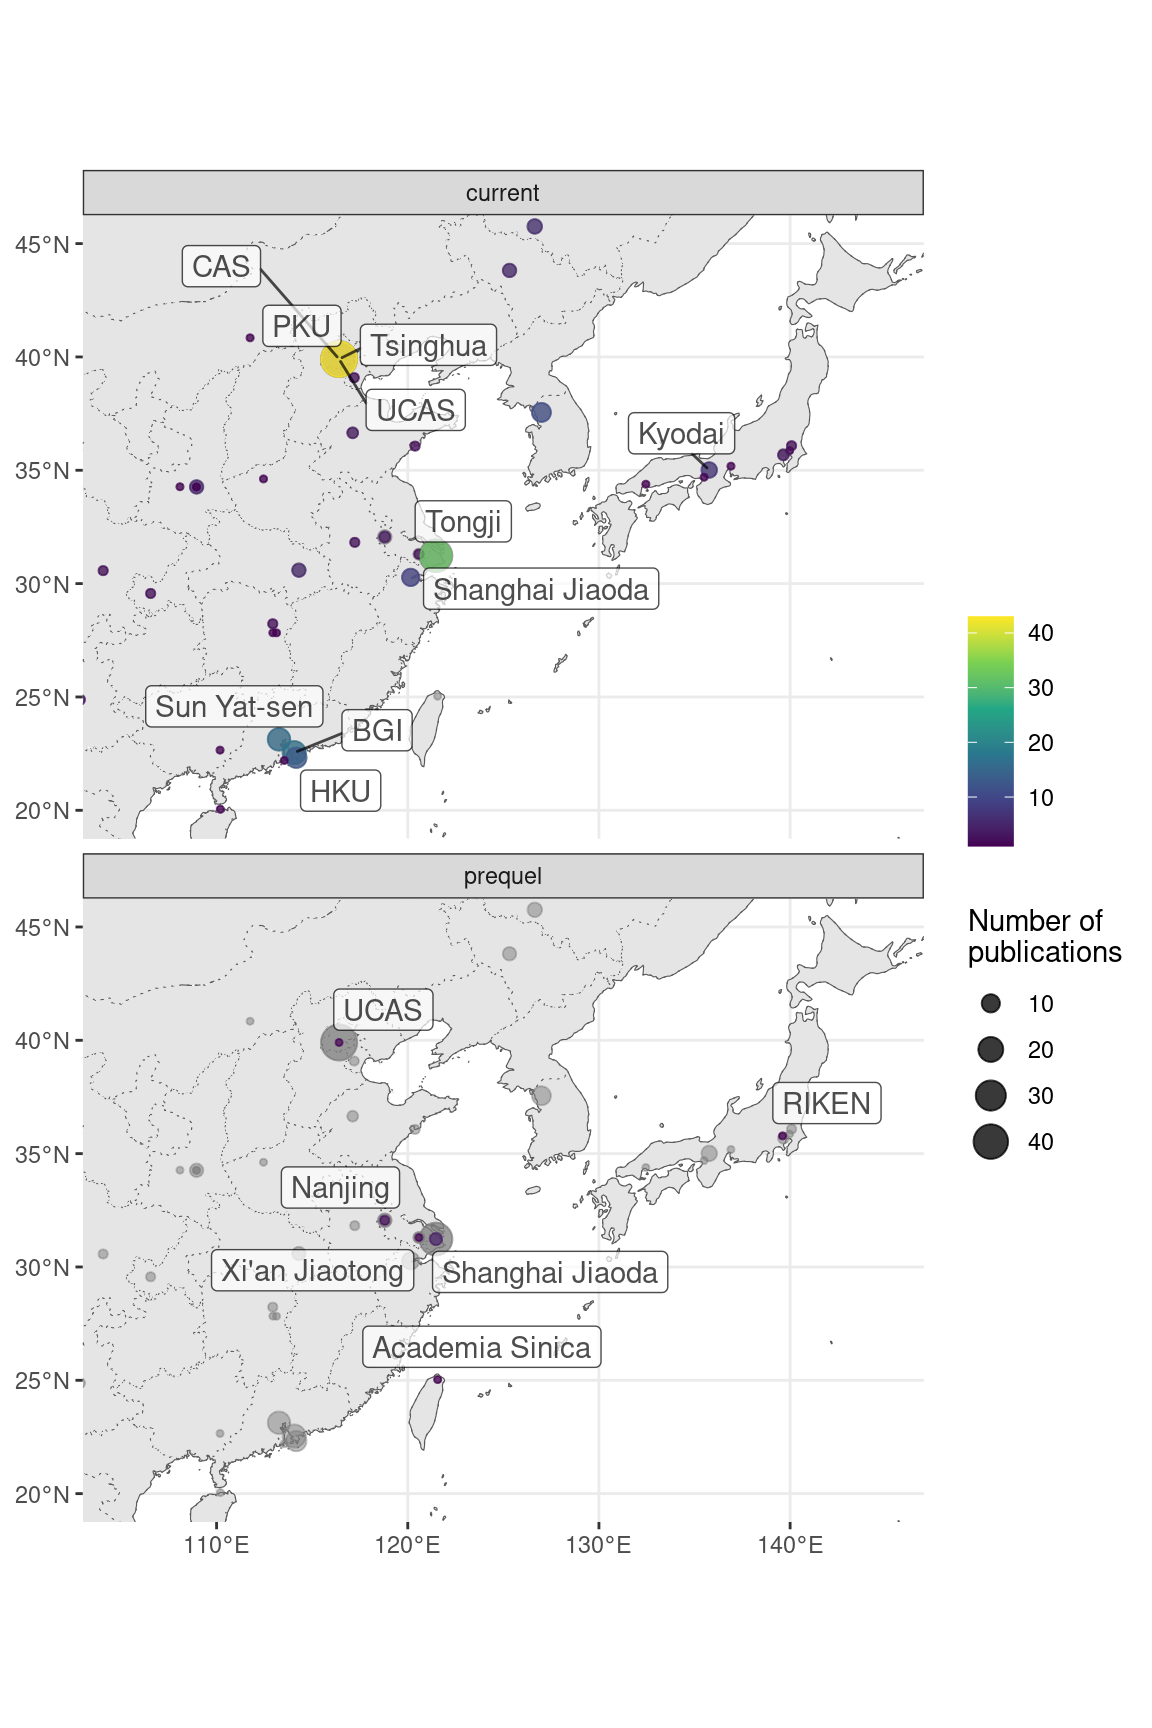 Map of where first authors of current era and prequel data analysis papers were located as of publication in northeastern Asia. Top 5 institutions in each era are labeled.